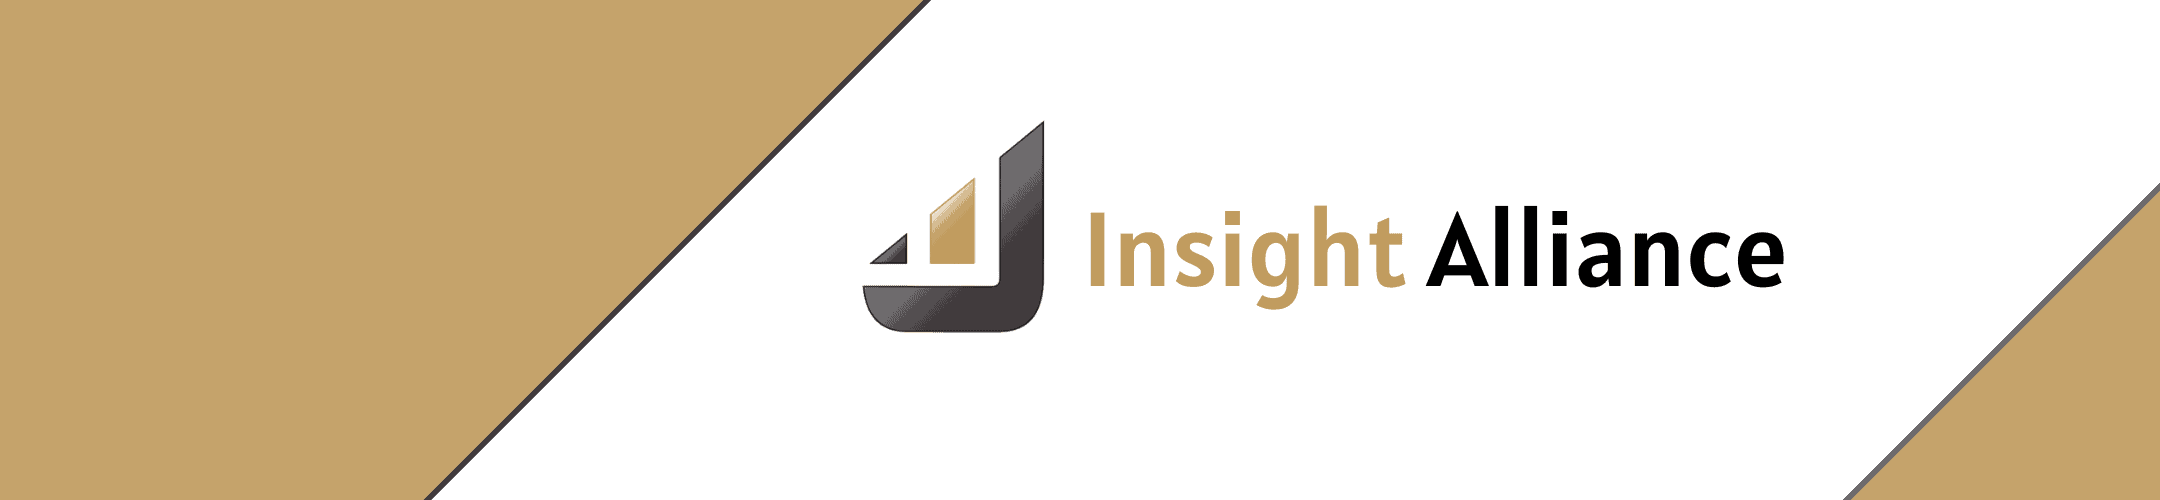 Logo of insight alliance displayed on an angled beige backdrop, featuring a stylized 'i' and 'a' forming a unique emblem.